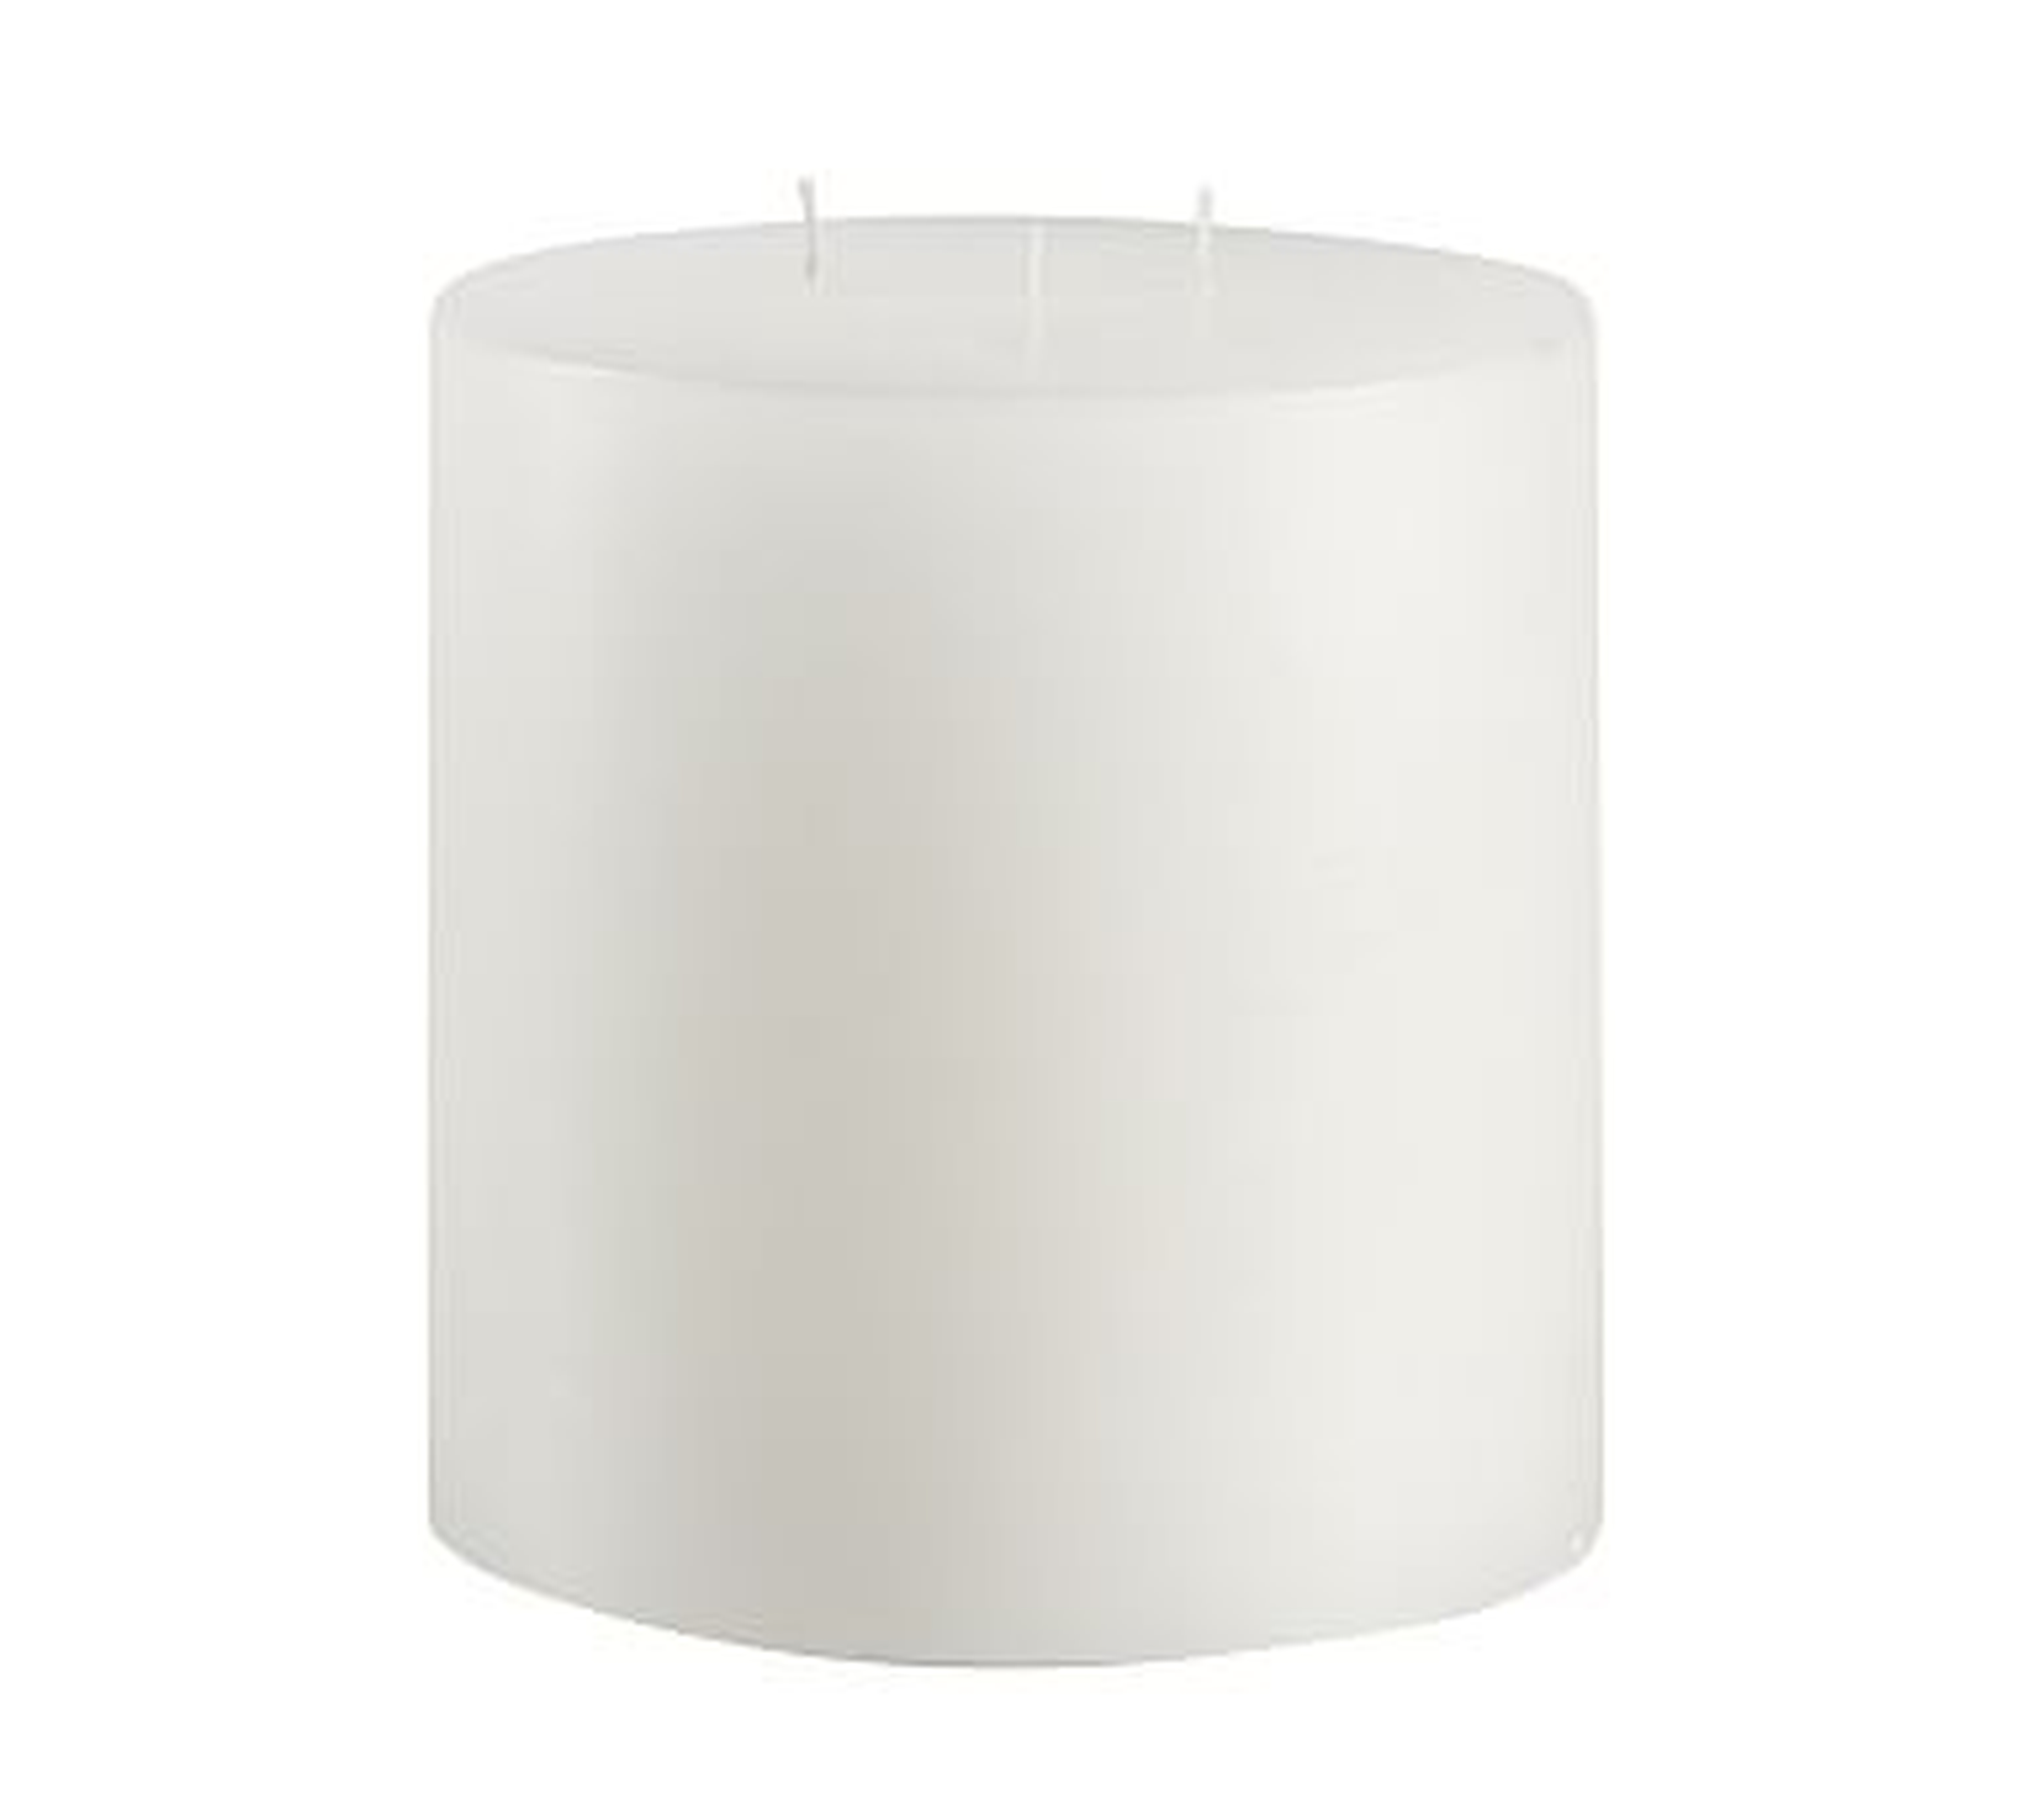 Unscented Wax Pillar Candle, 6"x6" - White - Pottery Barn